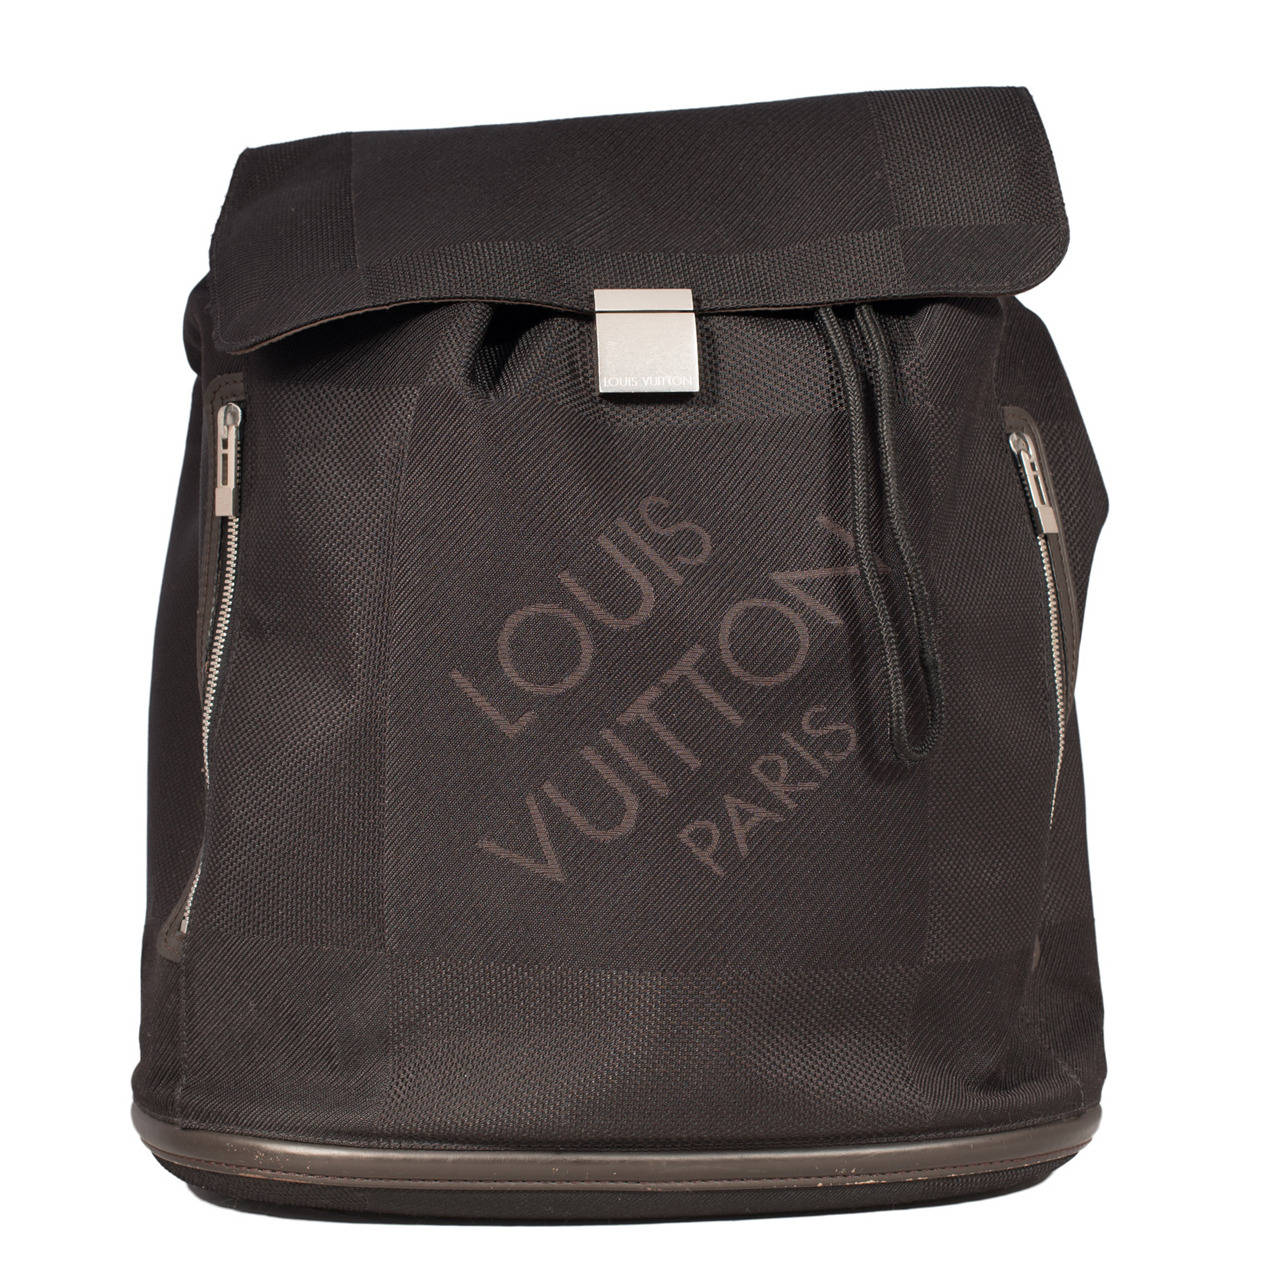 Louis Vuitton School Backpacks - For Sale on 1stDibs  louis vuitton school  bags, louis vuitton bags school, louis vuitton bag for school